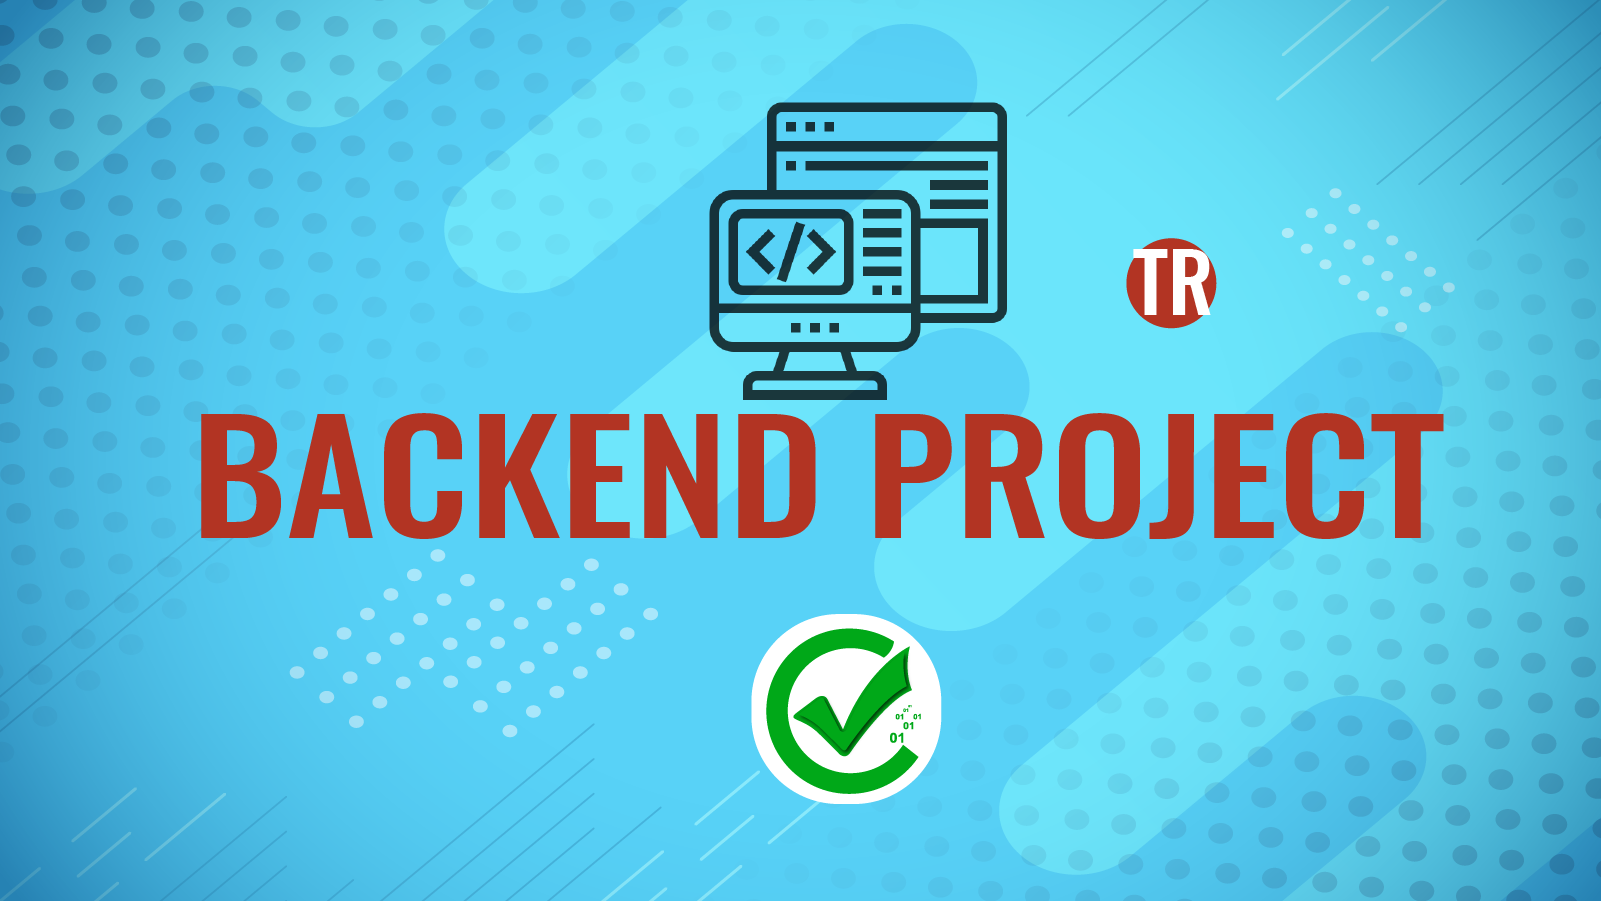 Backend Project 233 235